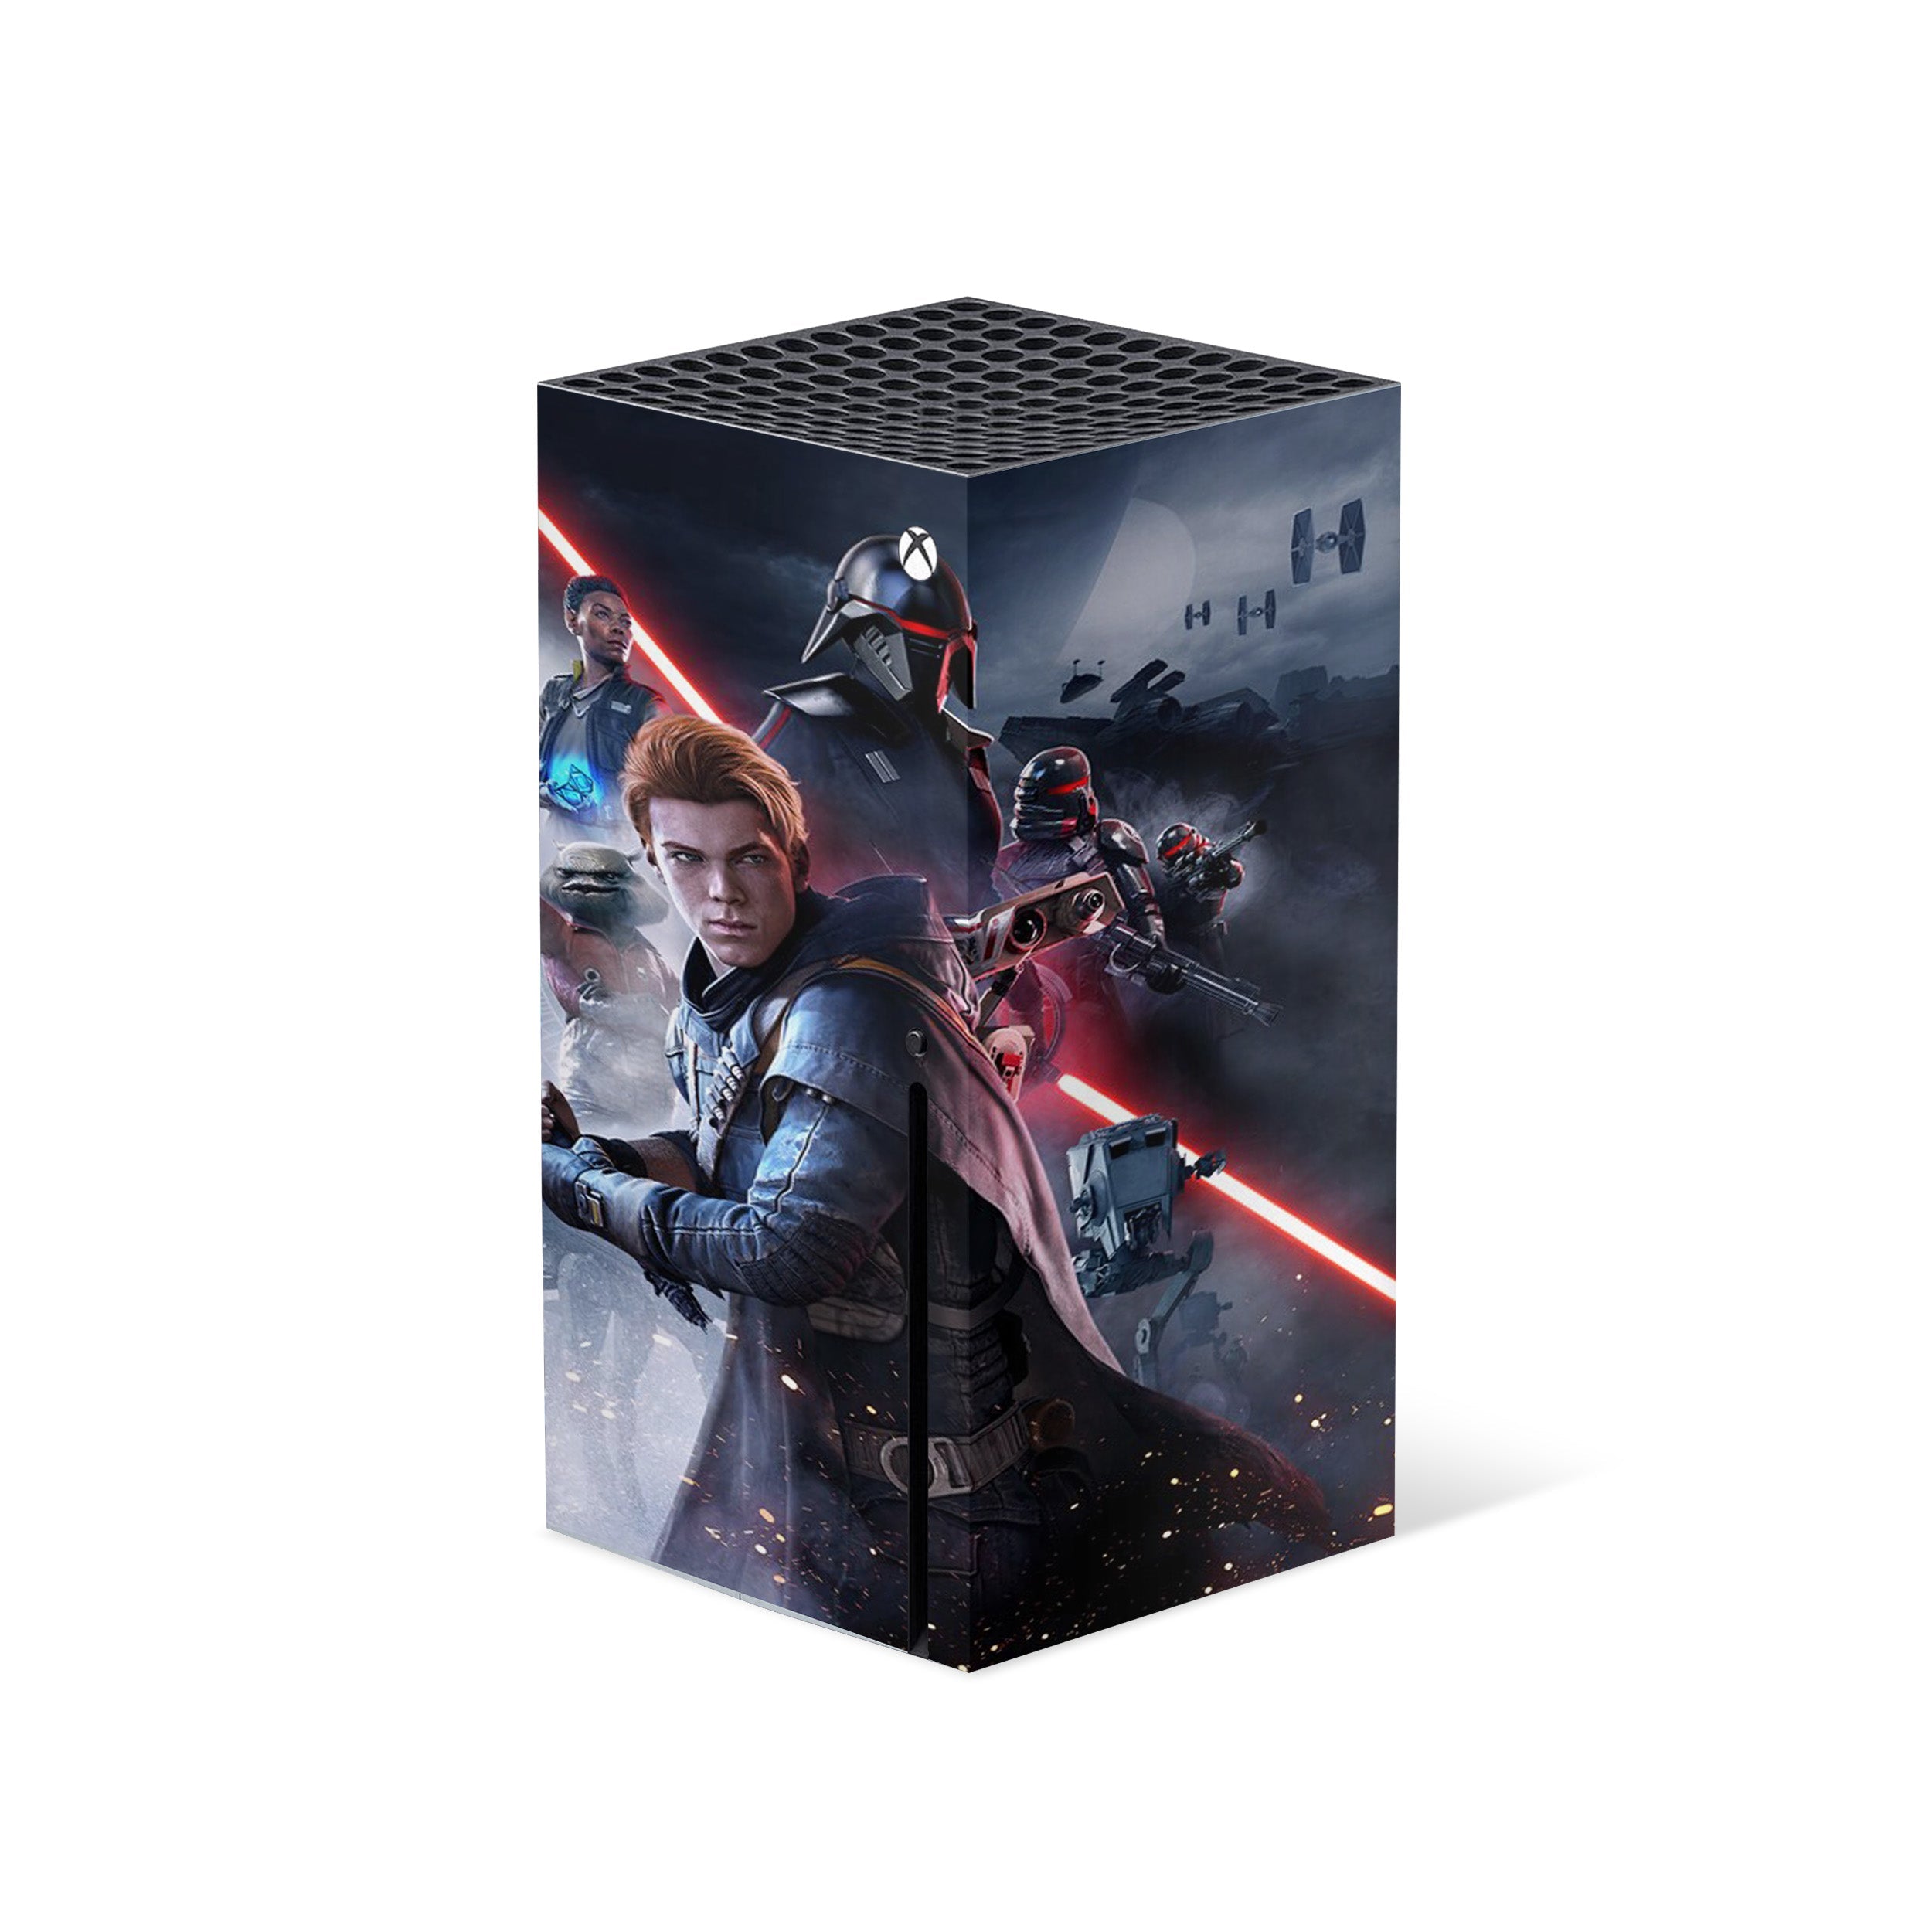 A video game skin featuring a Star Wars Jedi Fallen Order design for the Xbox Series X.